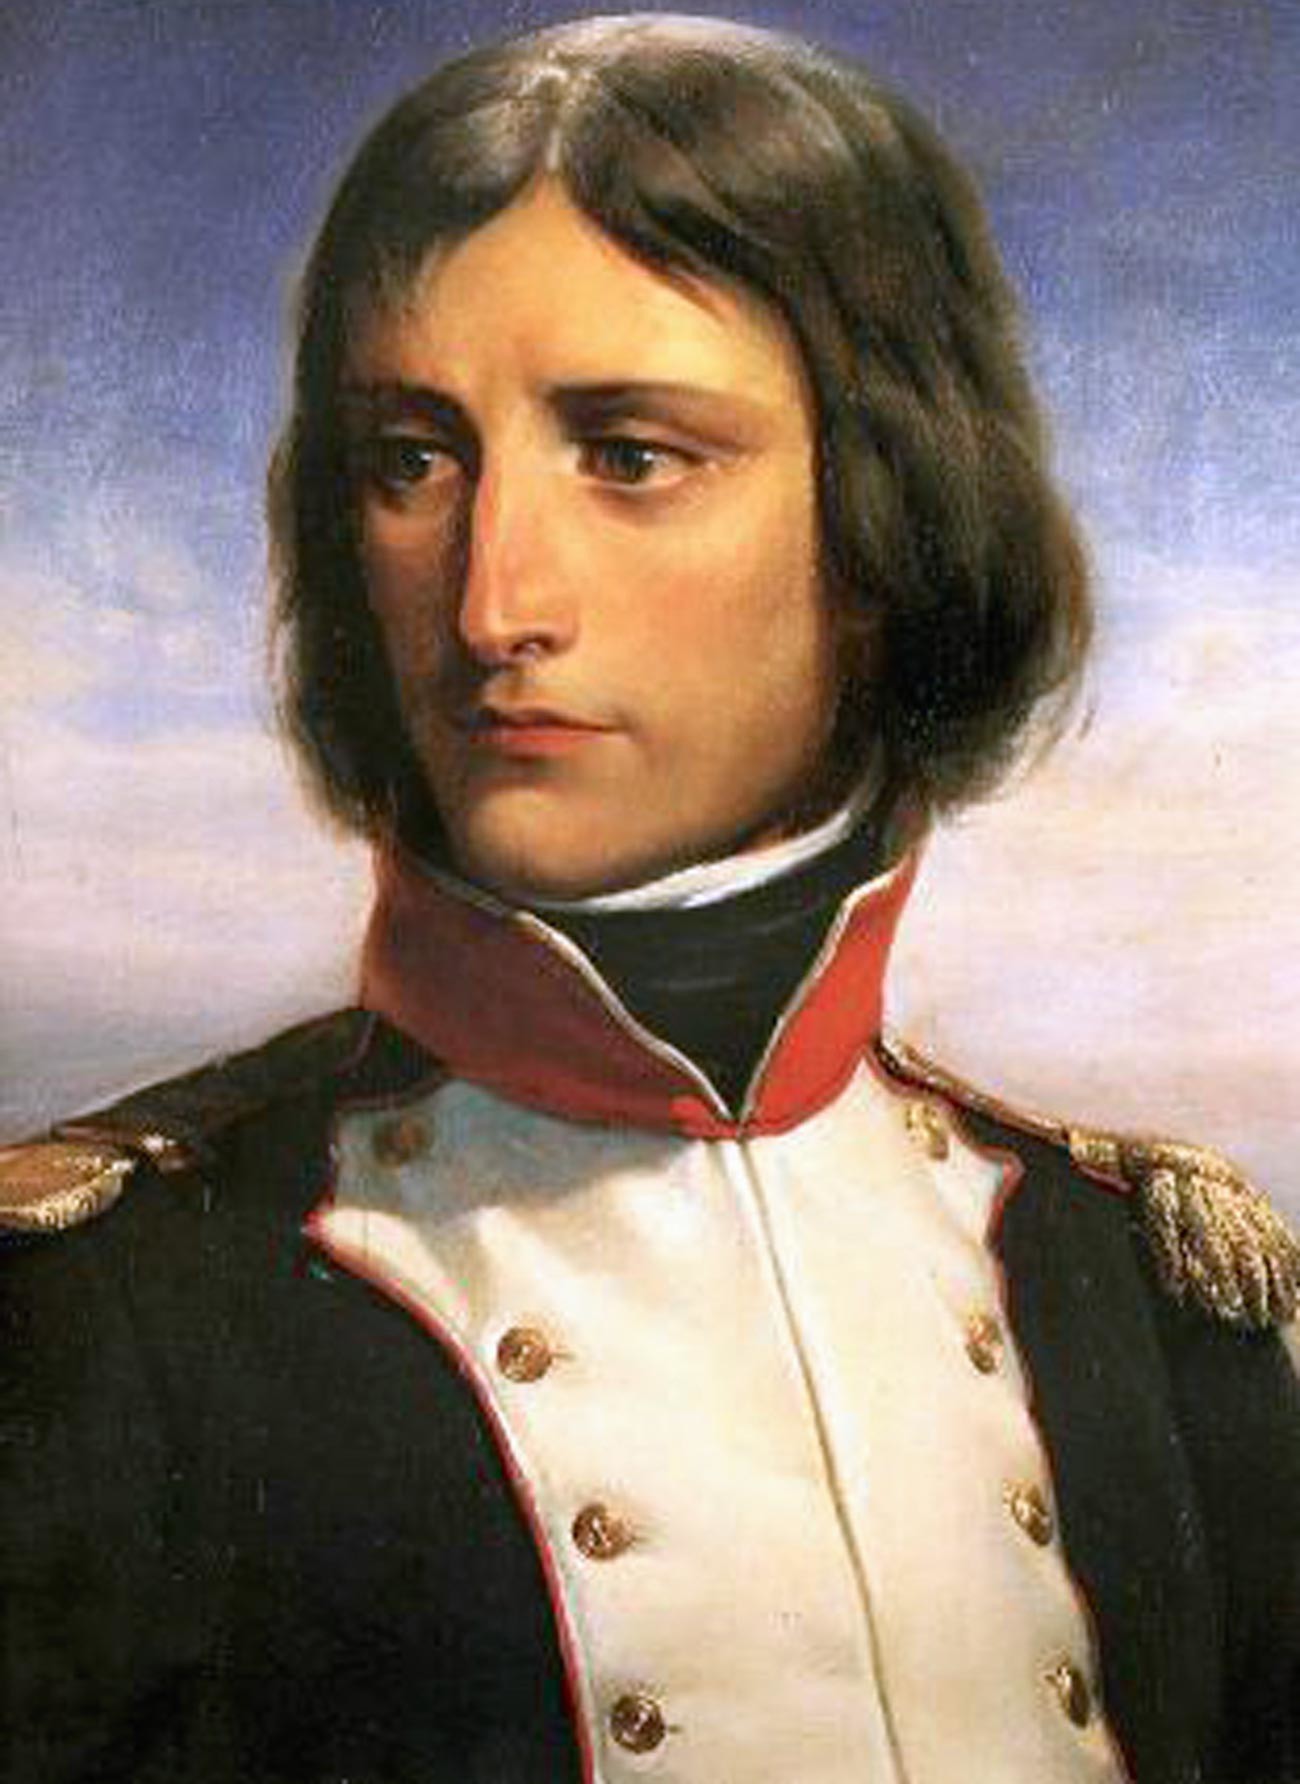 Napoléon Bonaparte in 1792, Lieutenant Colonel of the 1st Battalion of the French National Guard 